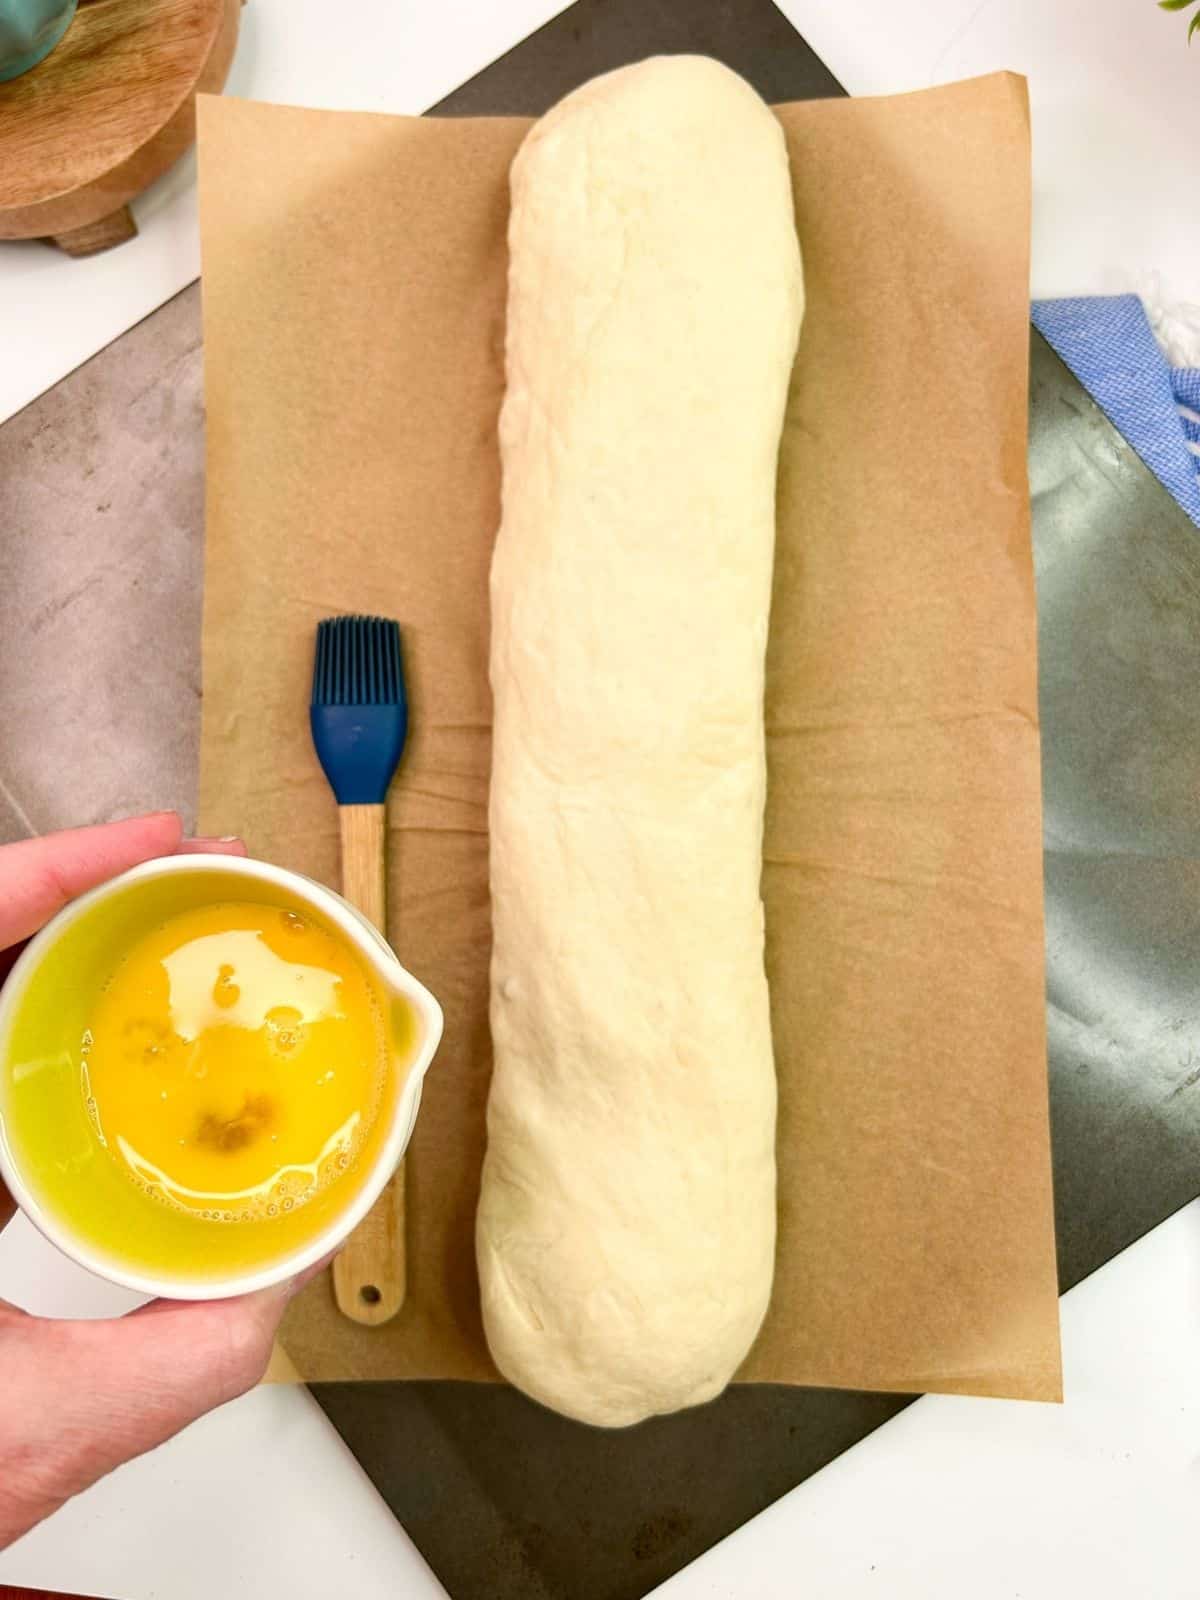 beaten egg in small dish held over rolled up sausage roll on parchment paper.